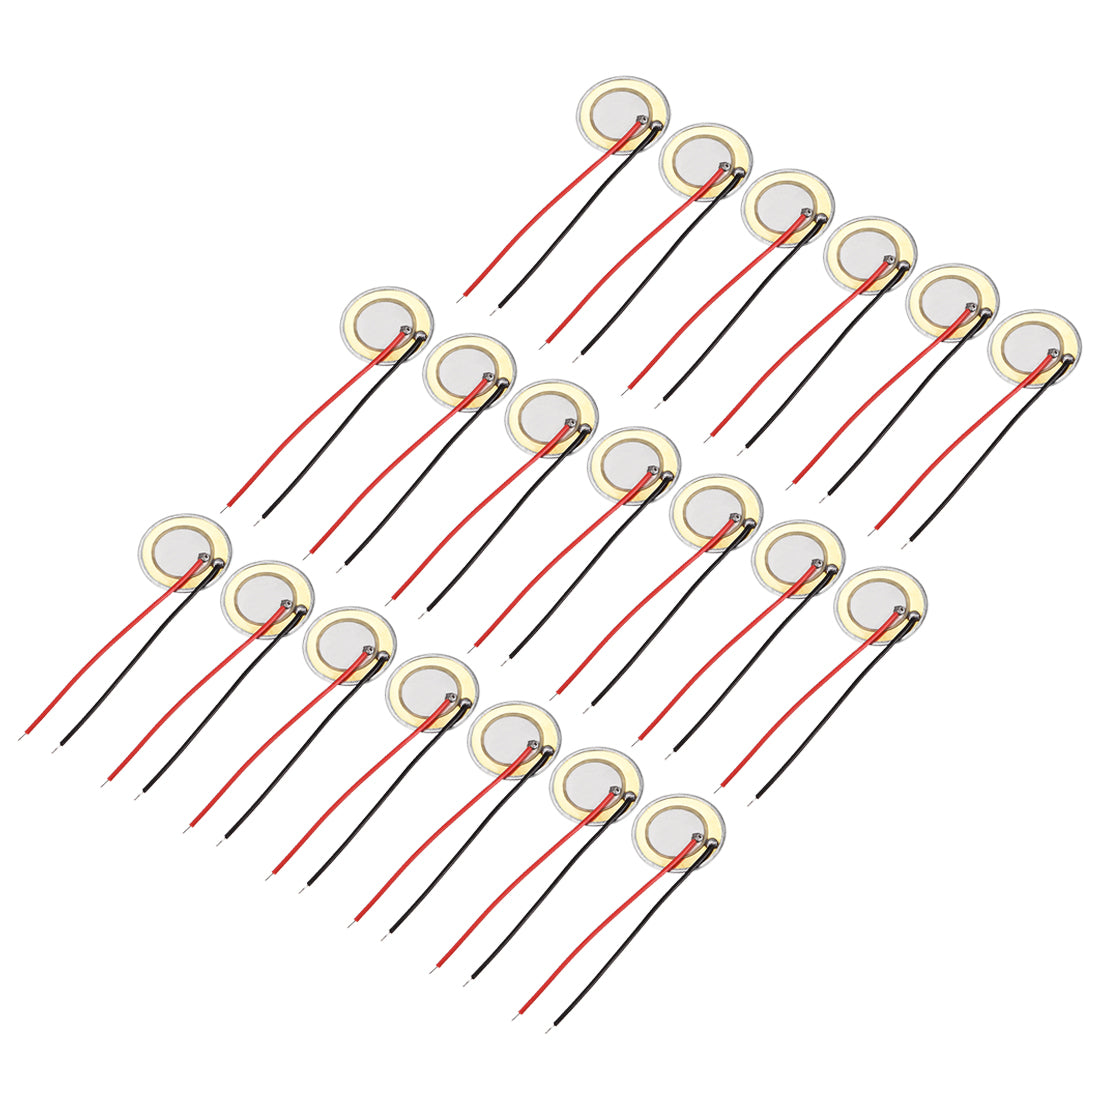 uxcell Uxcell 20 Pcs Piezo Discs 20mm Acoustic Pickup Transducer Microphone Trigger Element CBG Guitar